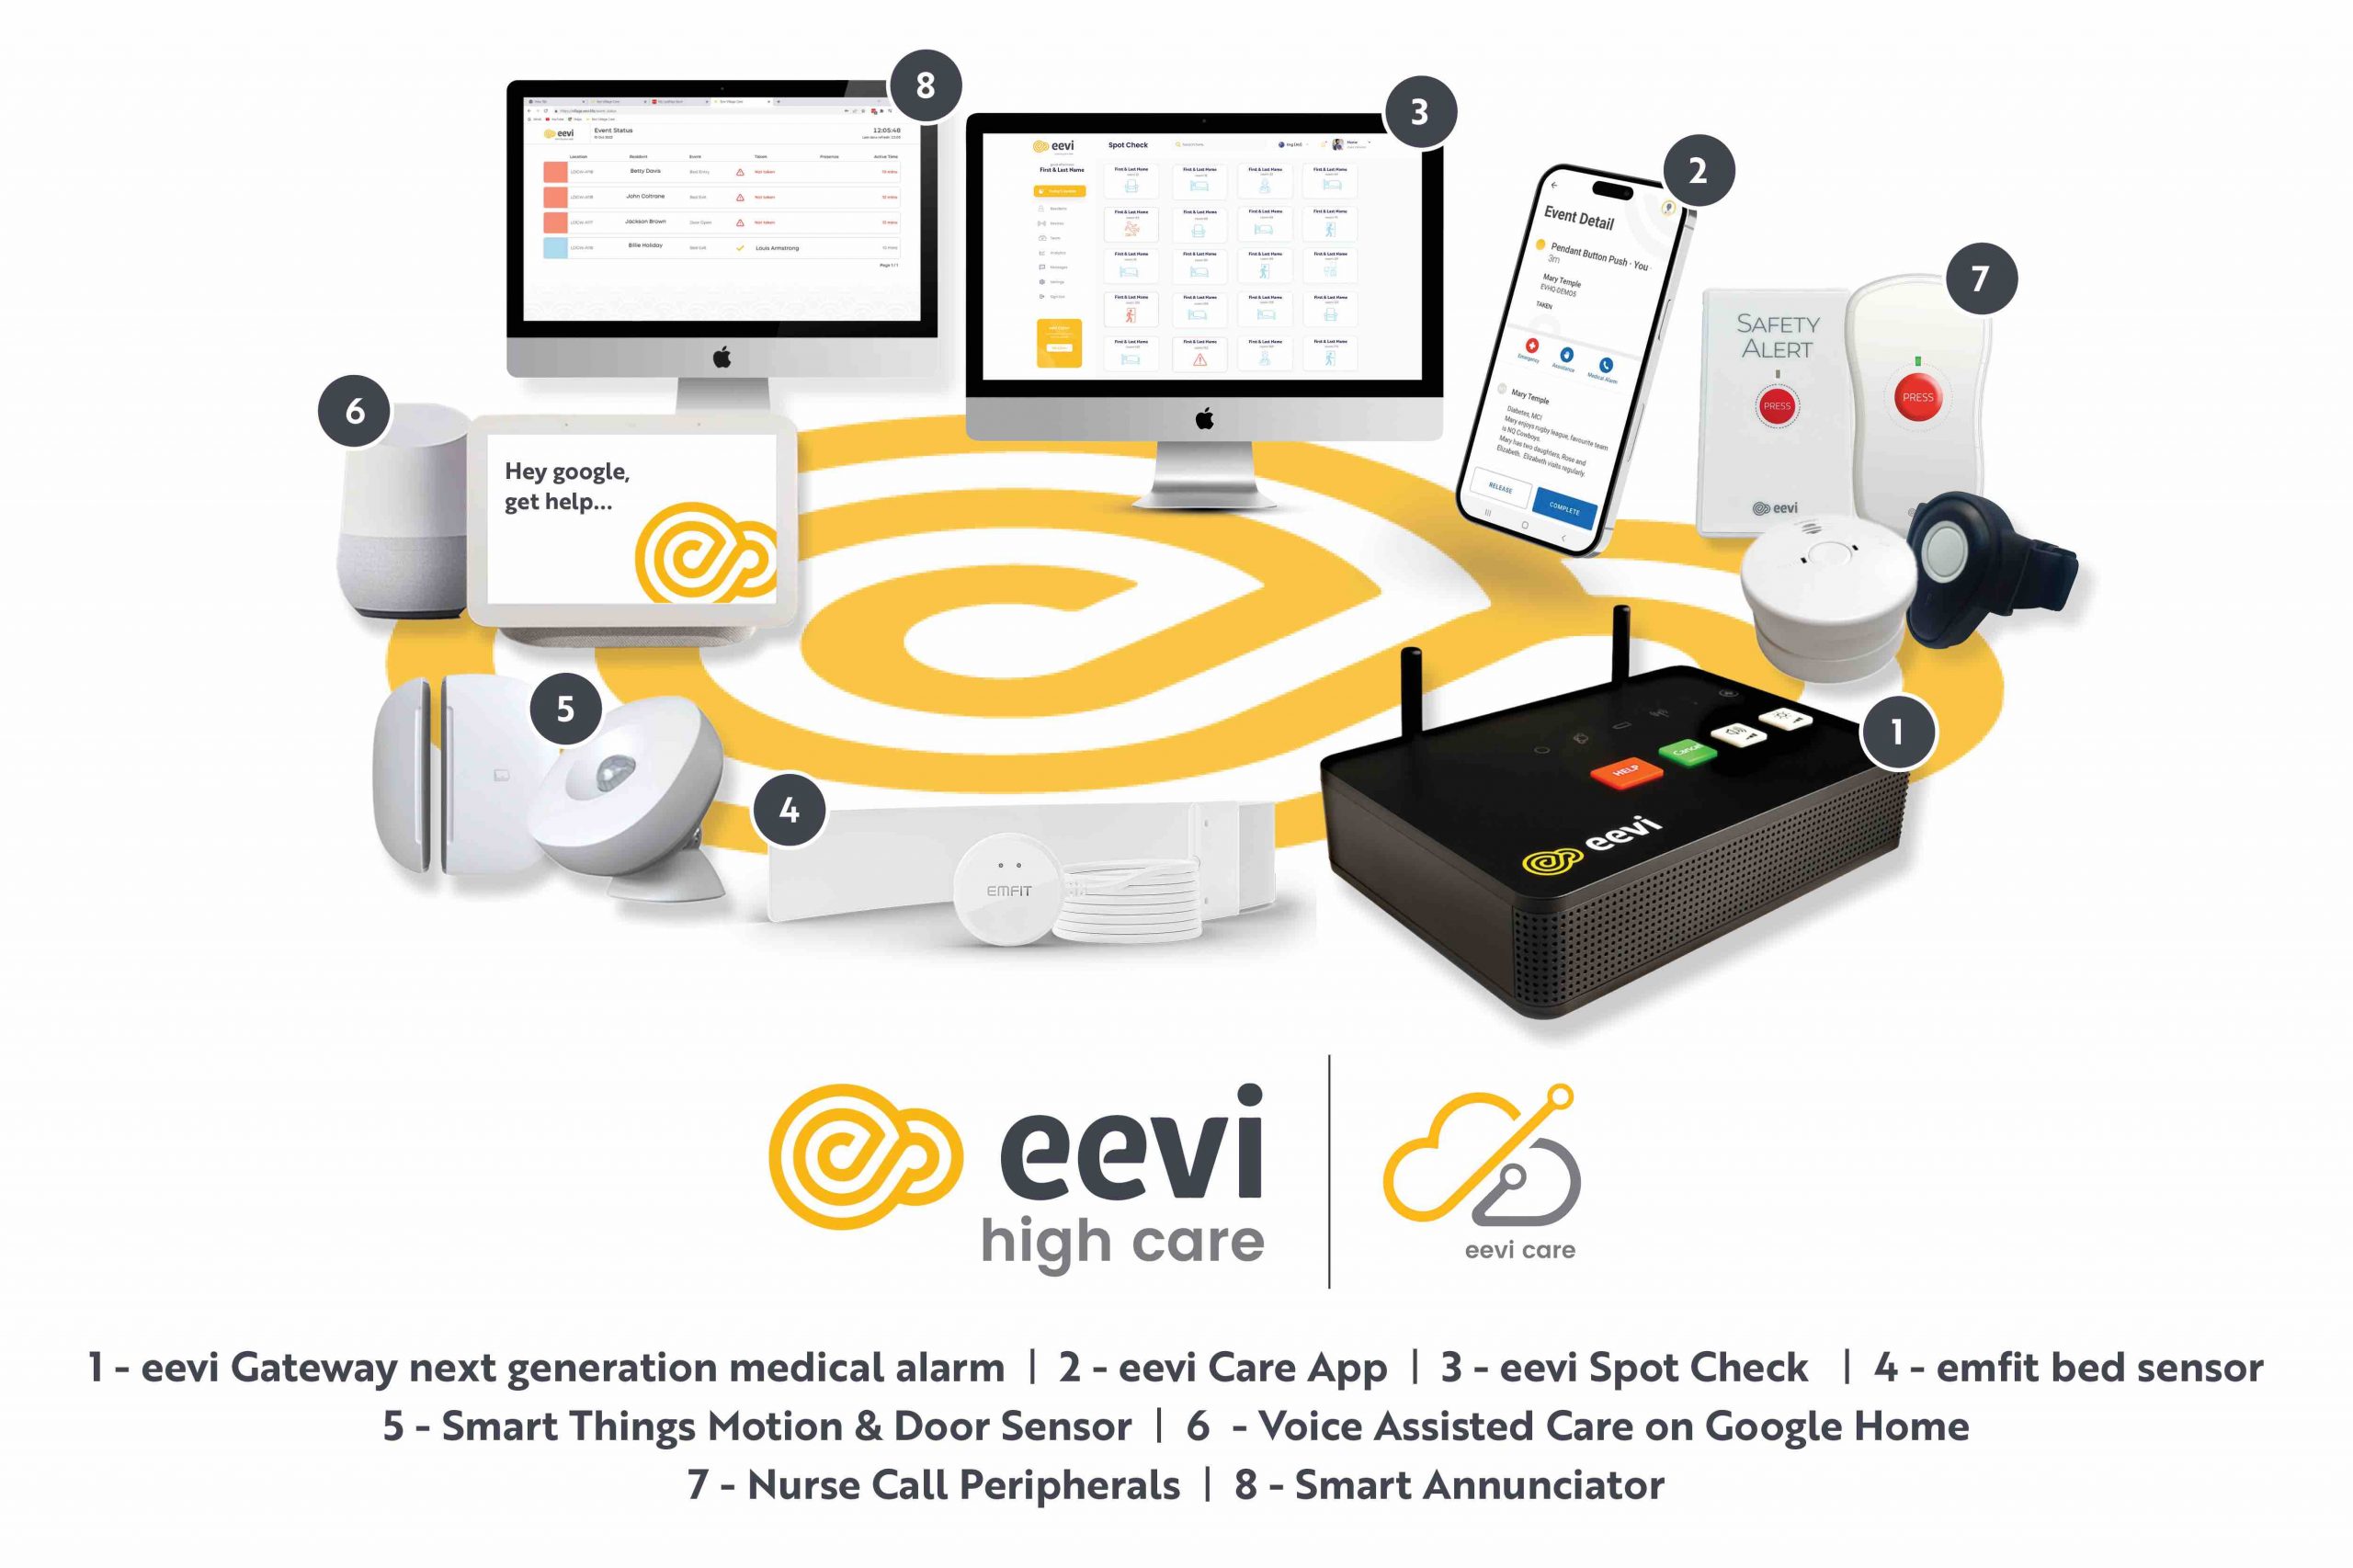 eevi high care product package